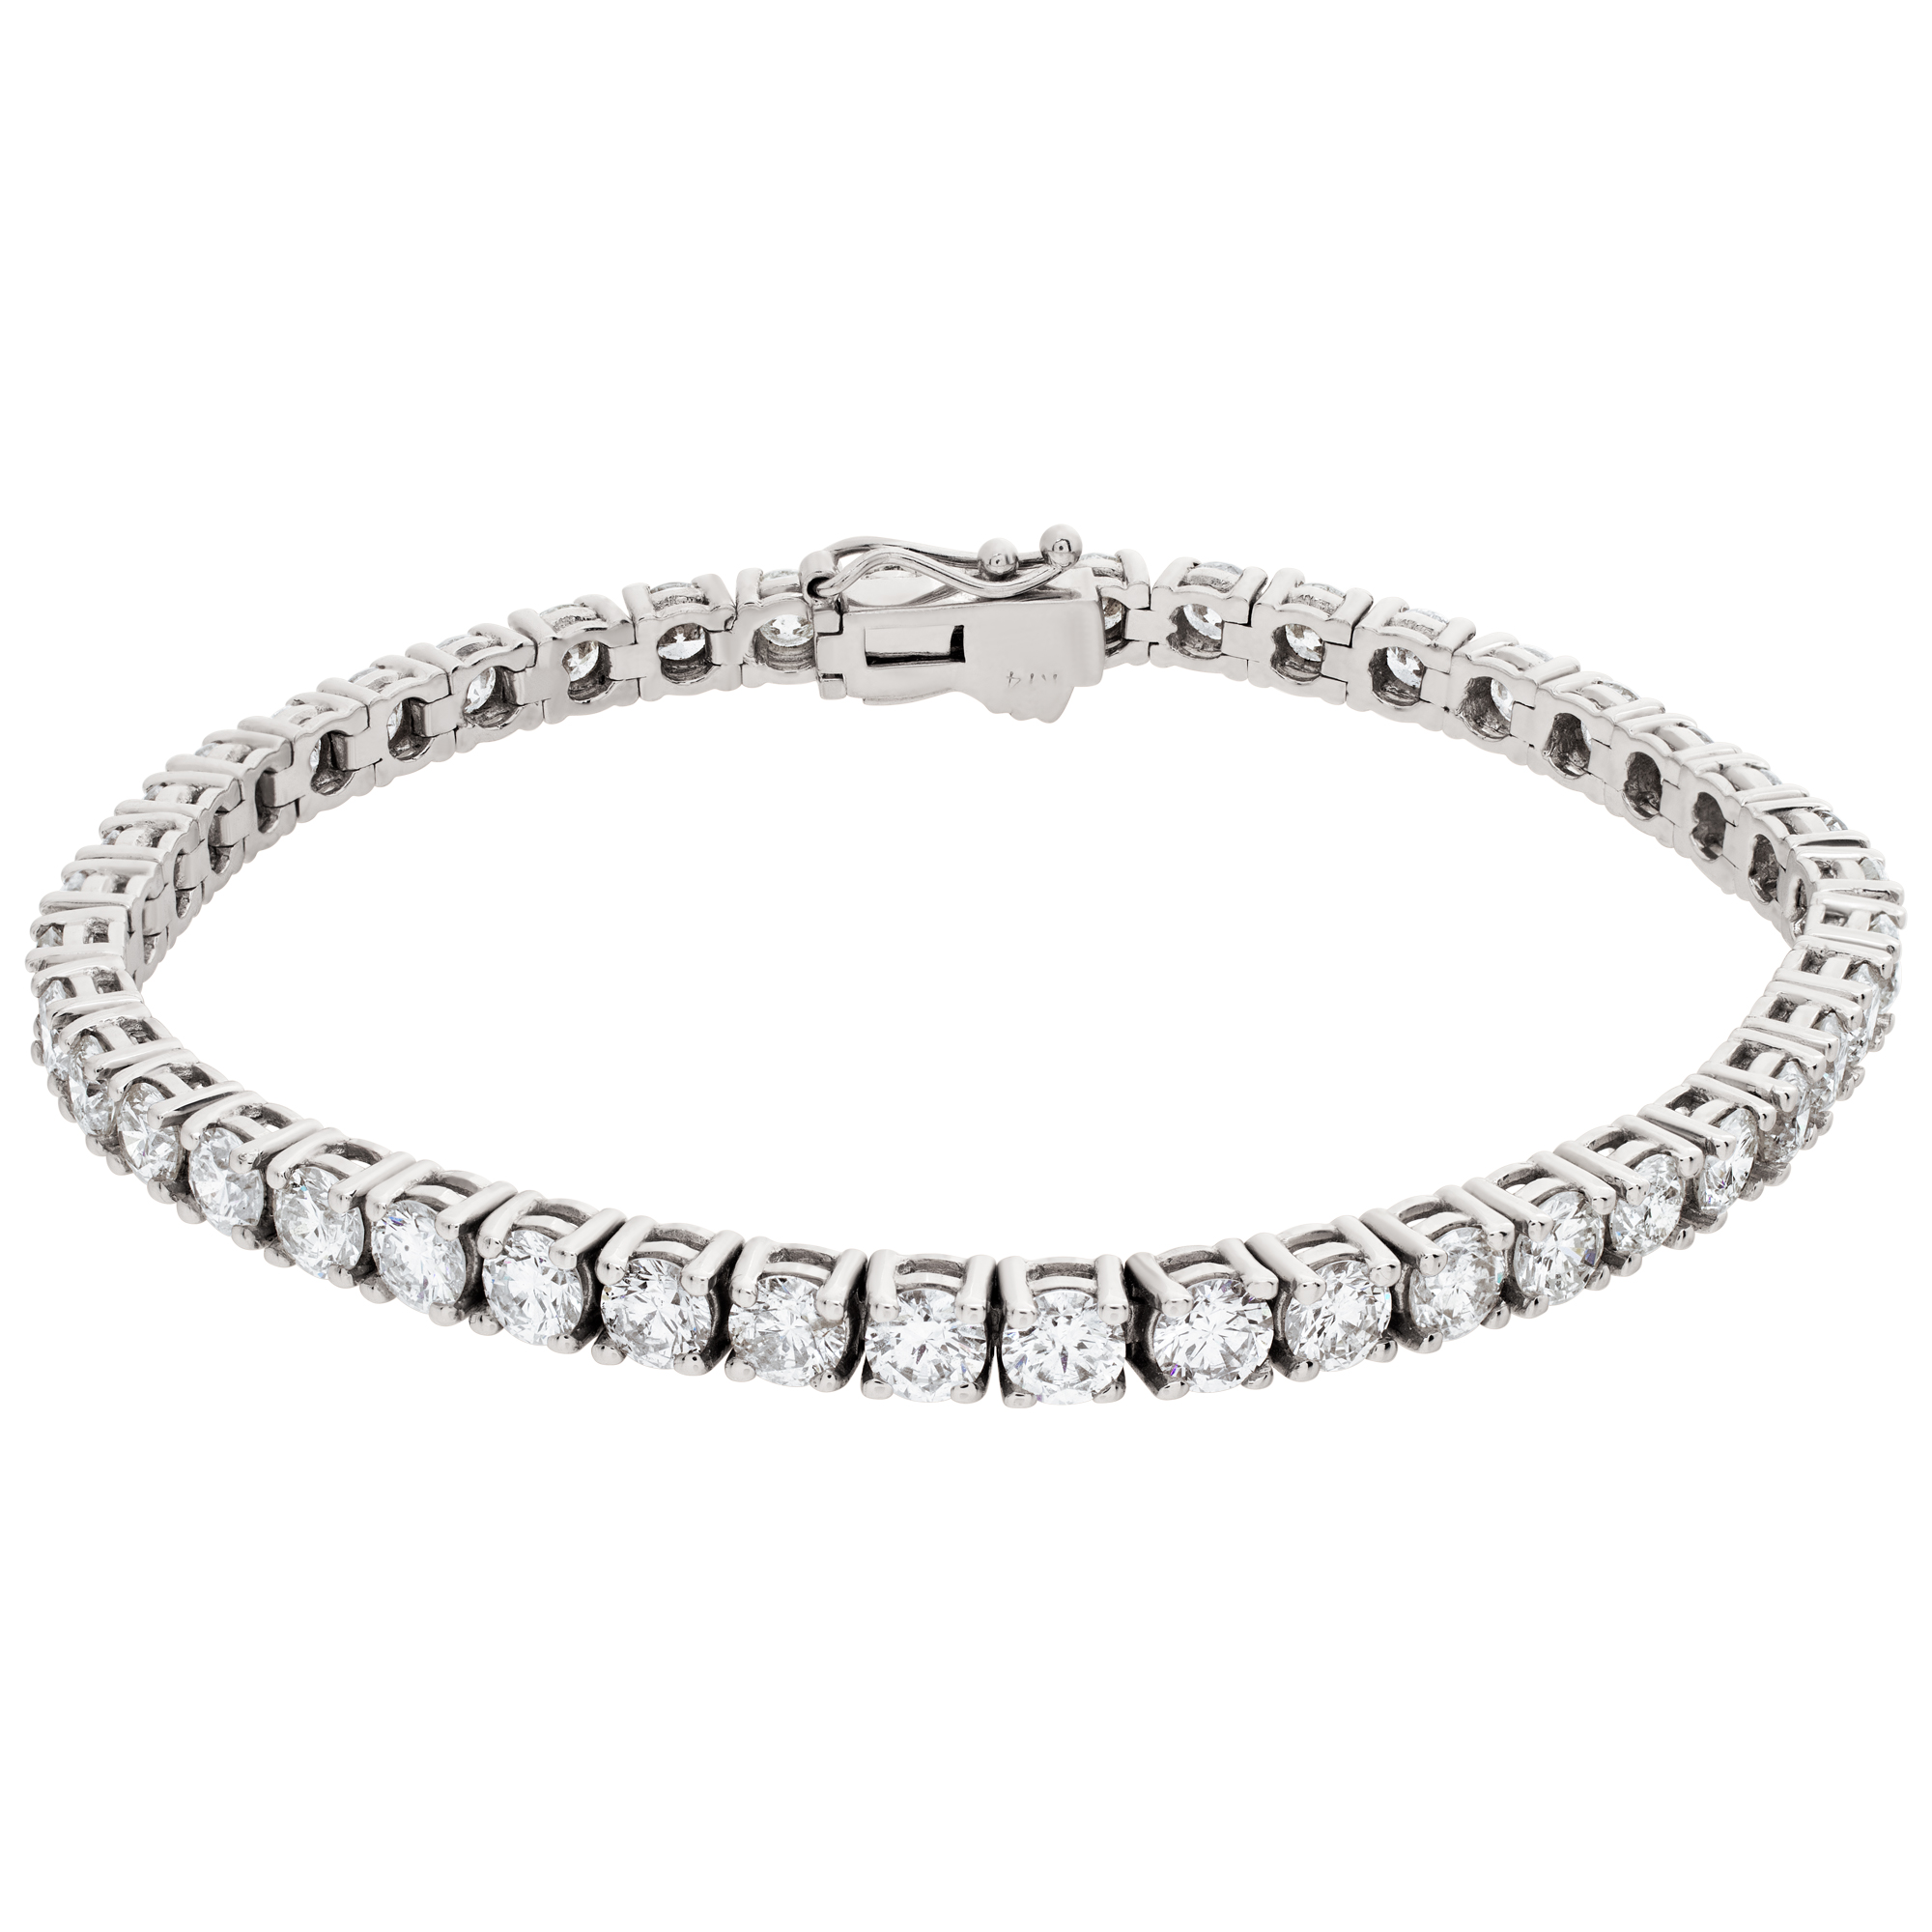 Timeless 14k white gold tennis bracelet with 8.62 carats in round brilliant diamonds